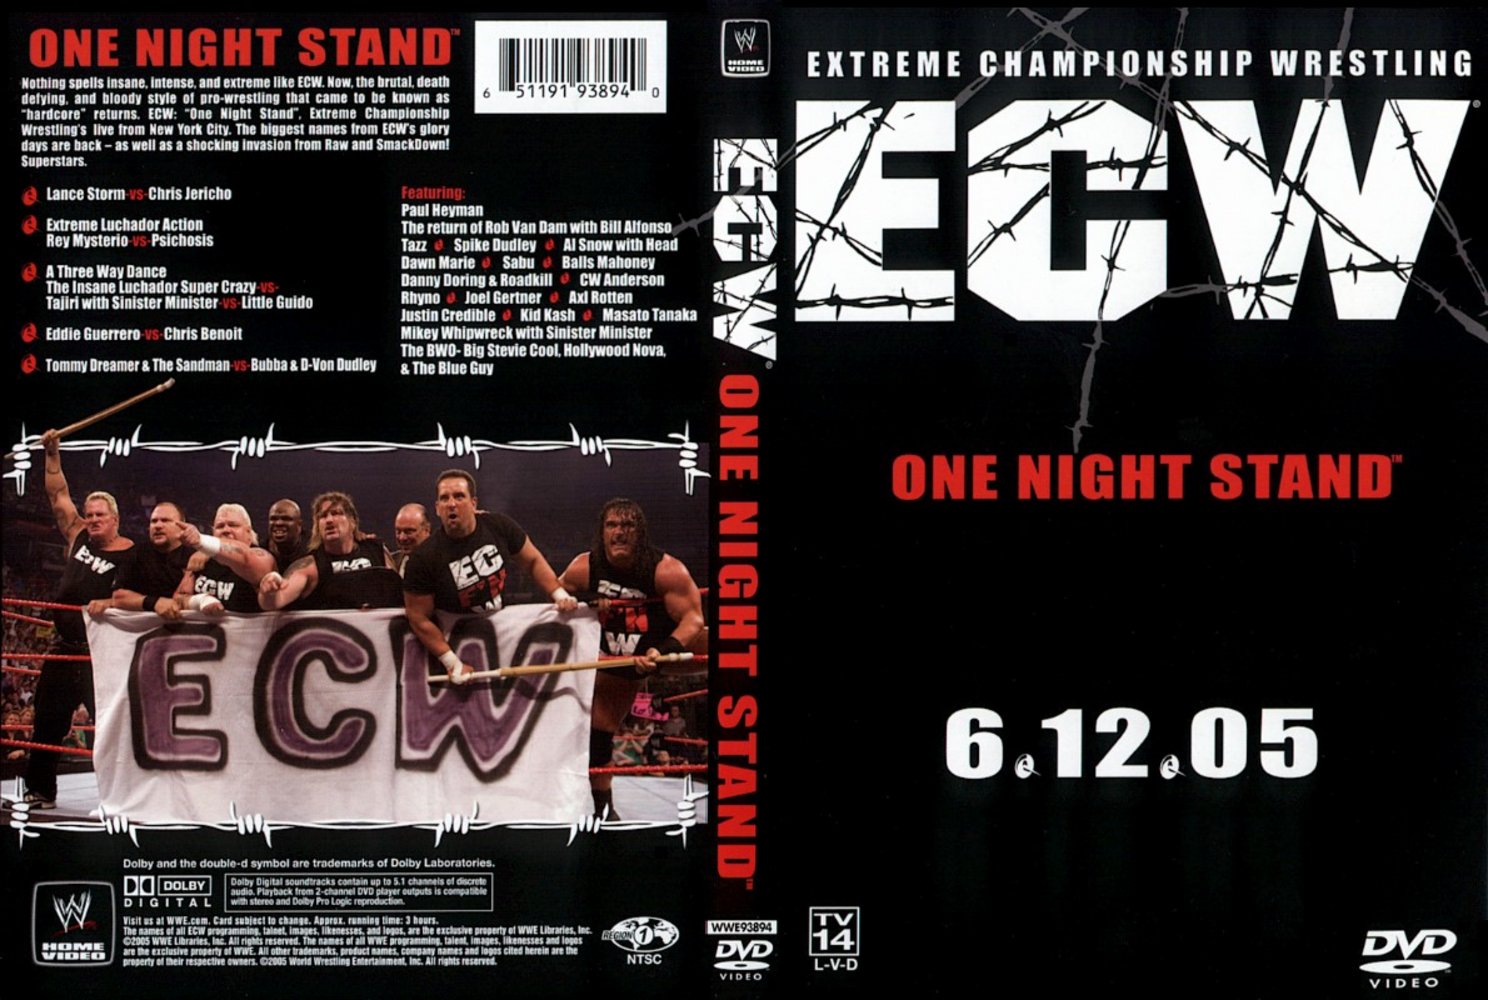 Jaquette DVD ECW One ight stand 2005